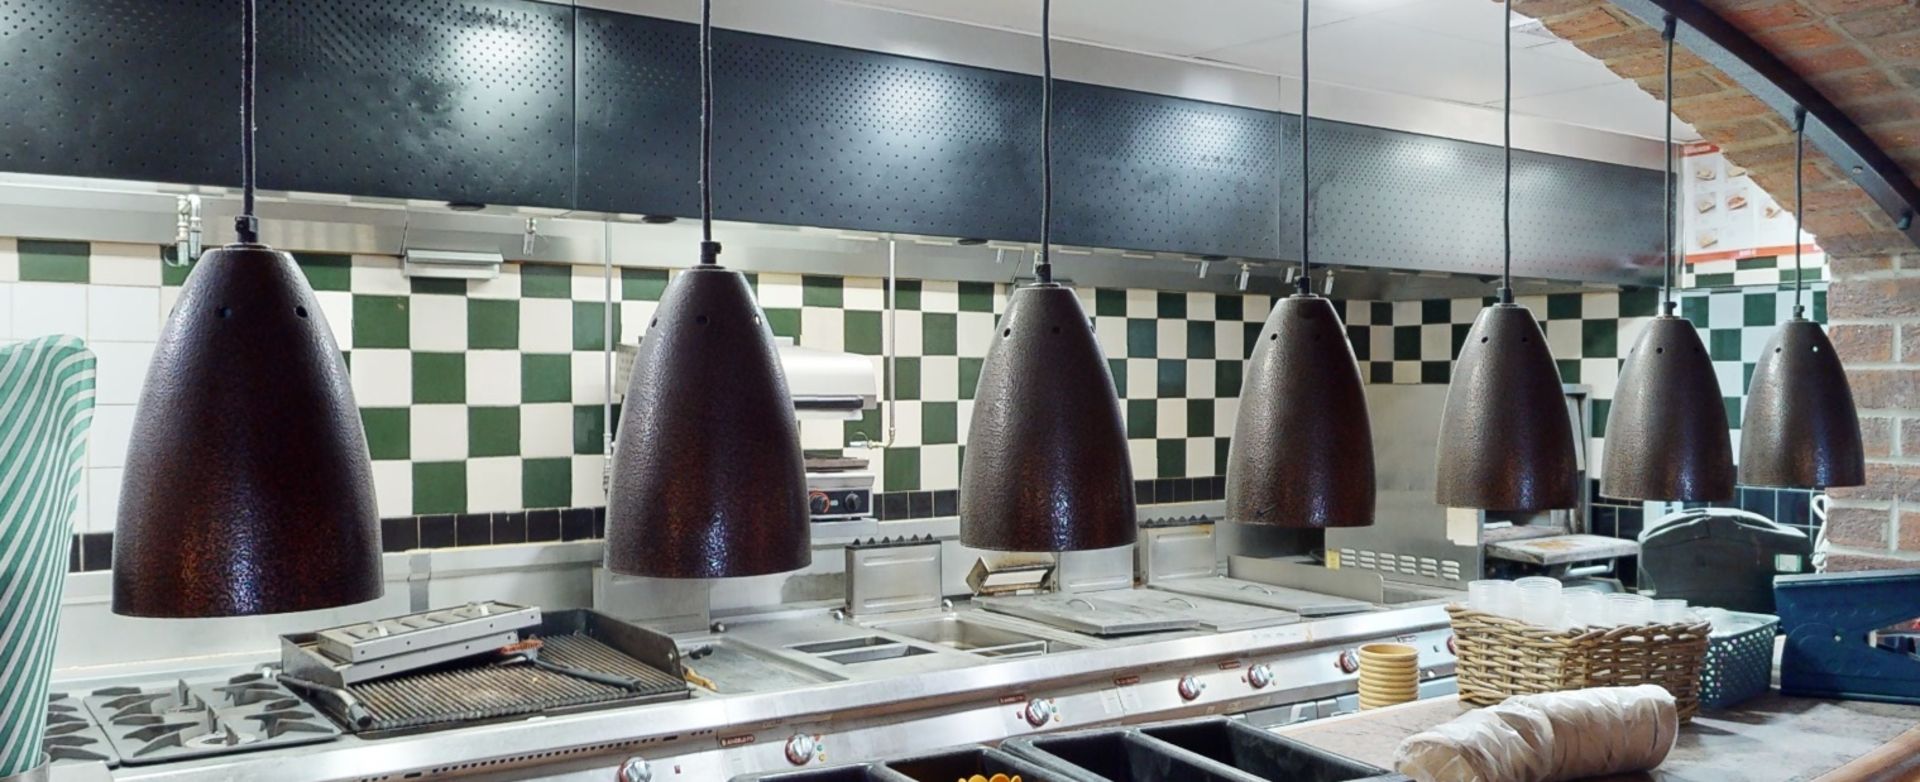 7 x Restaurant Food Warming Heat Lamps On A Curved Mounting Bracket, For Passthrough Server - Image 2 of 3